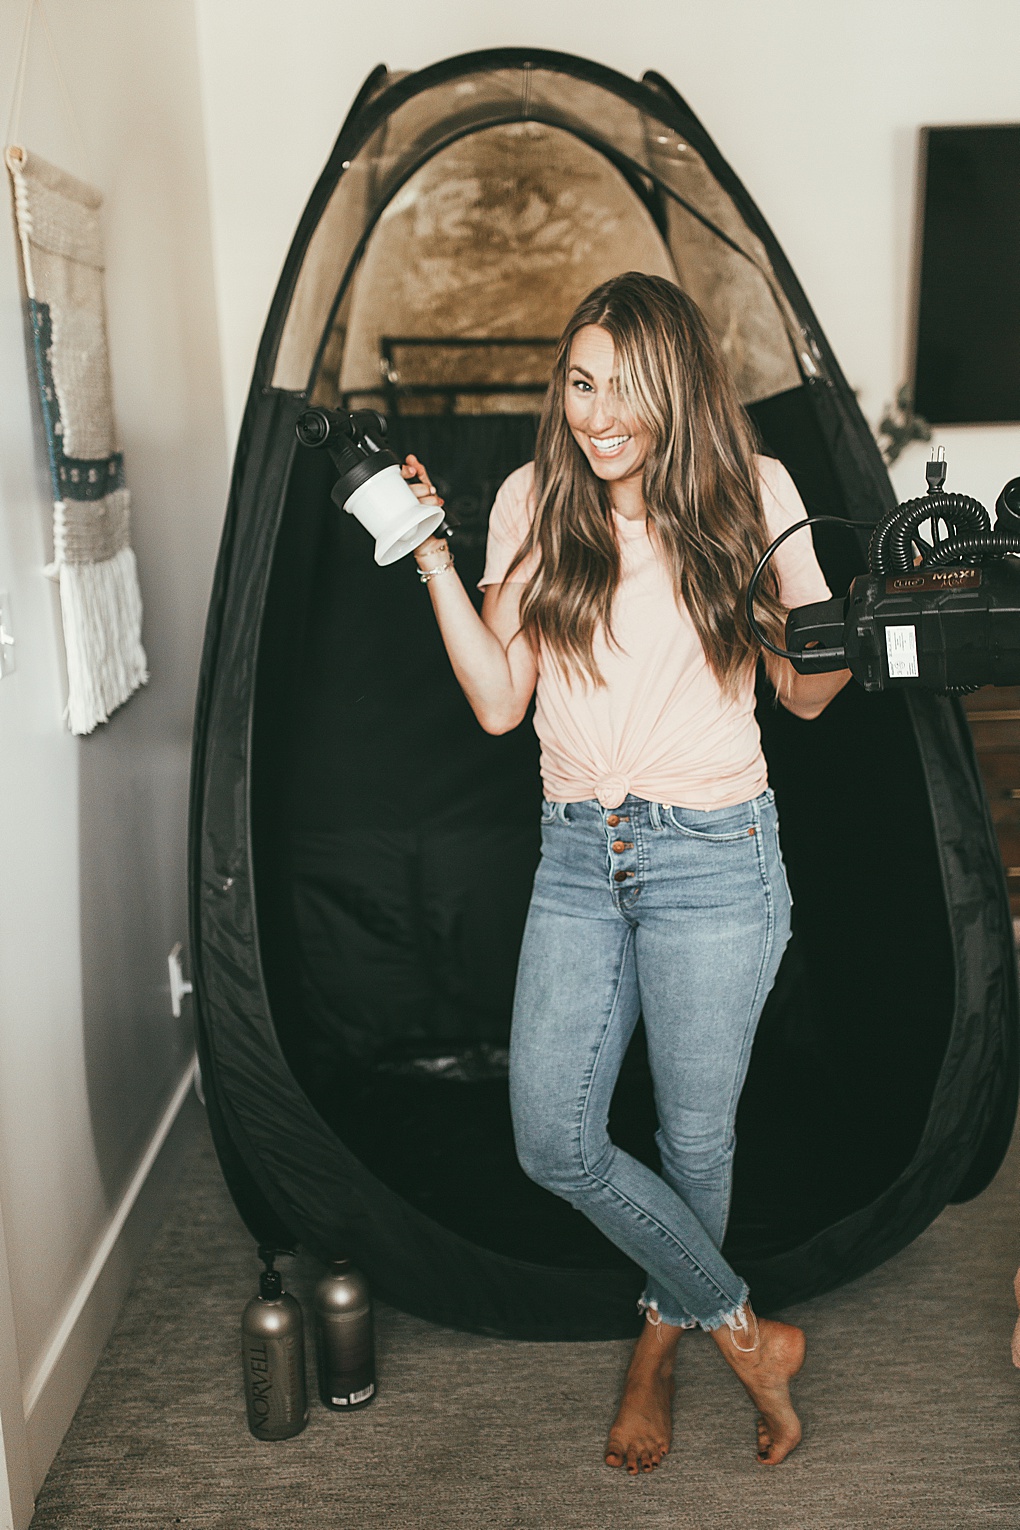 Utah Blogger Dani Marie shares how you can do an at home spray tan flawlessly!